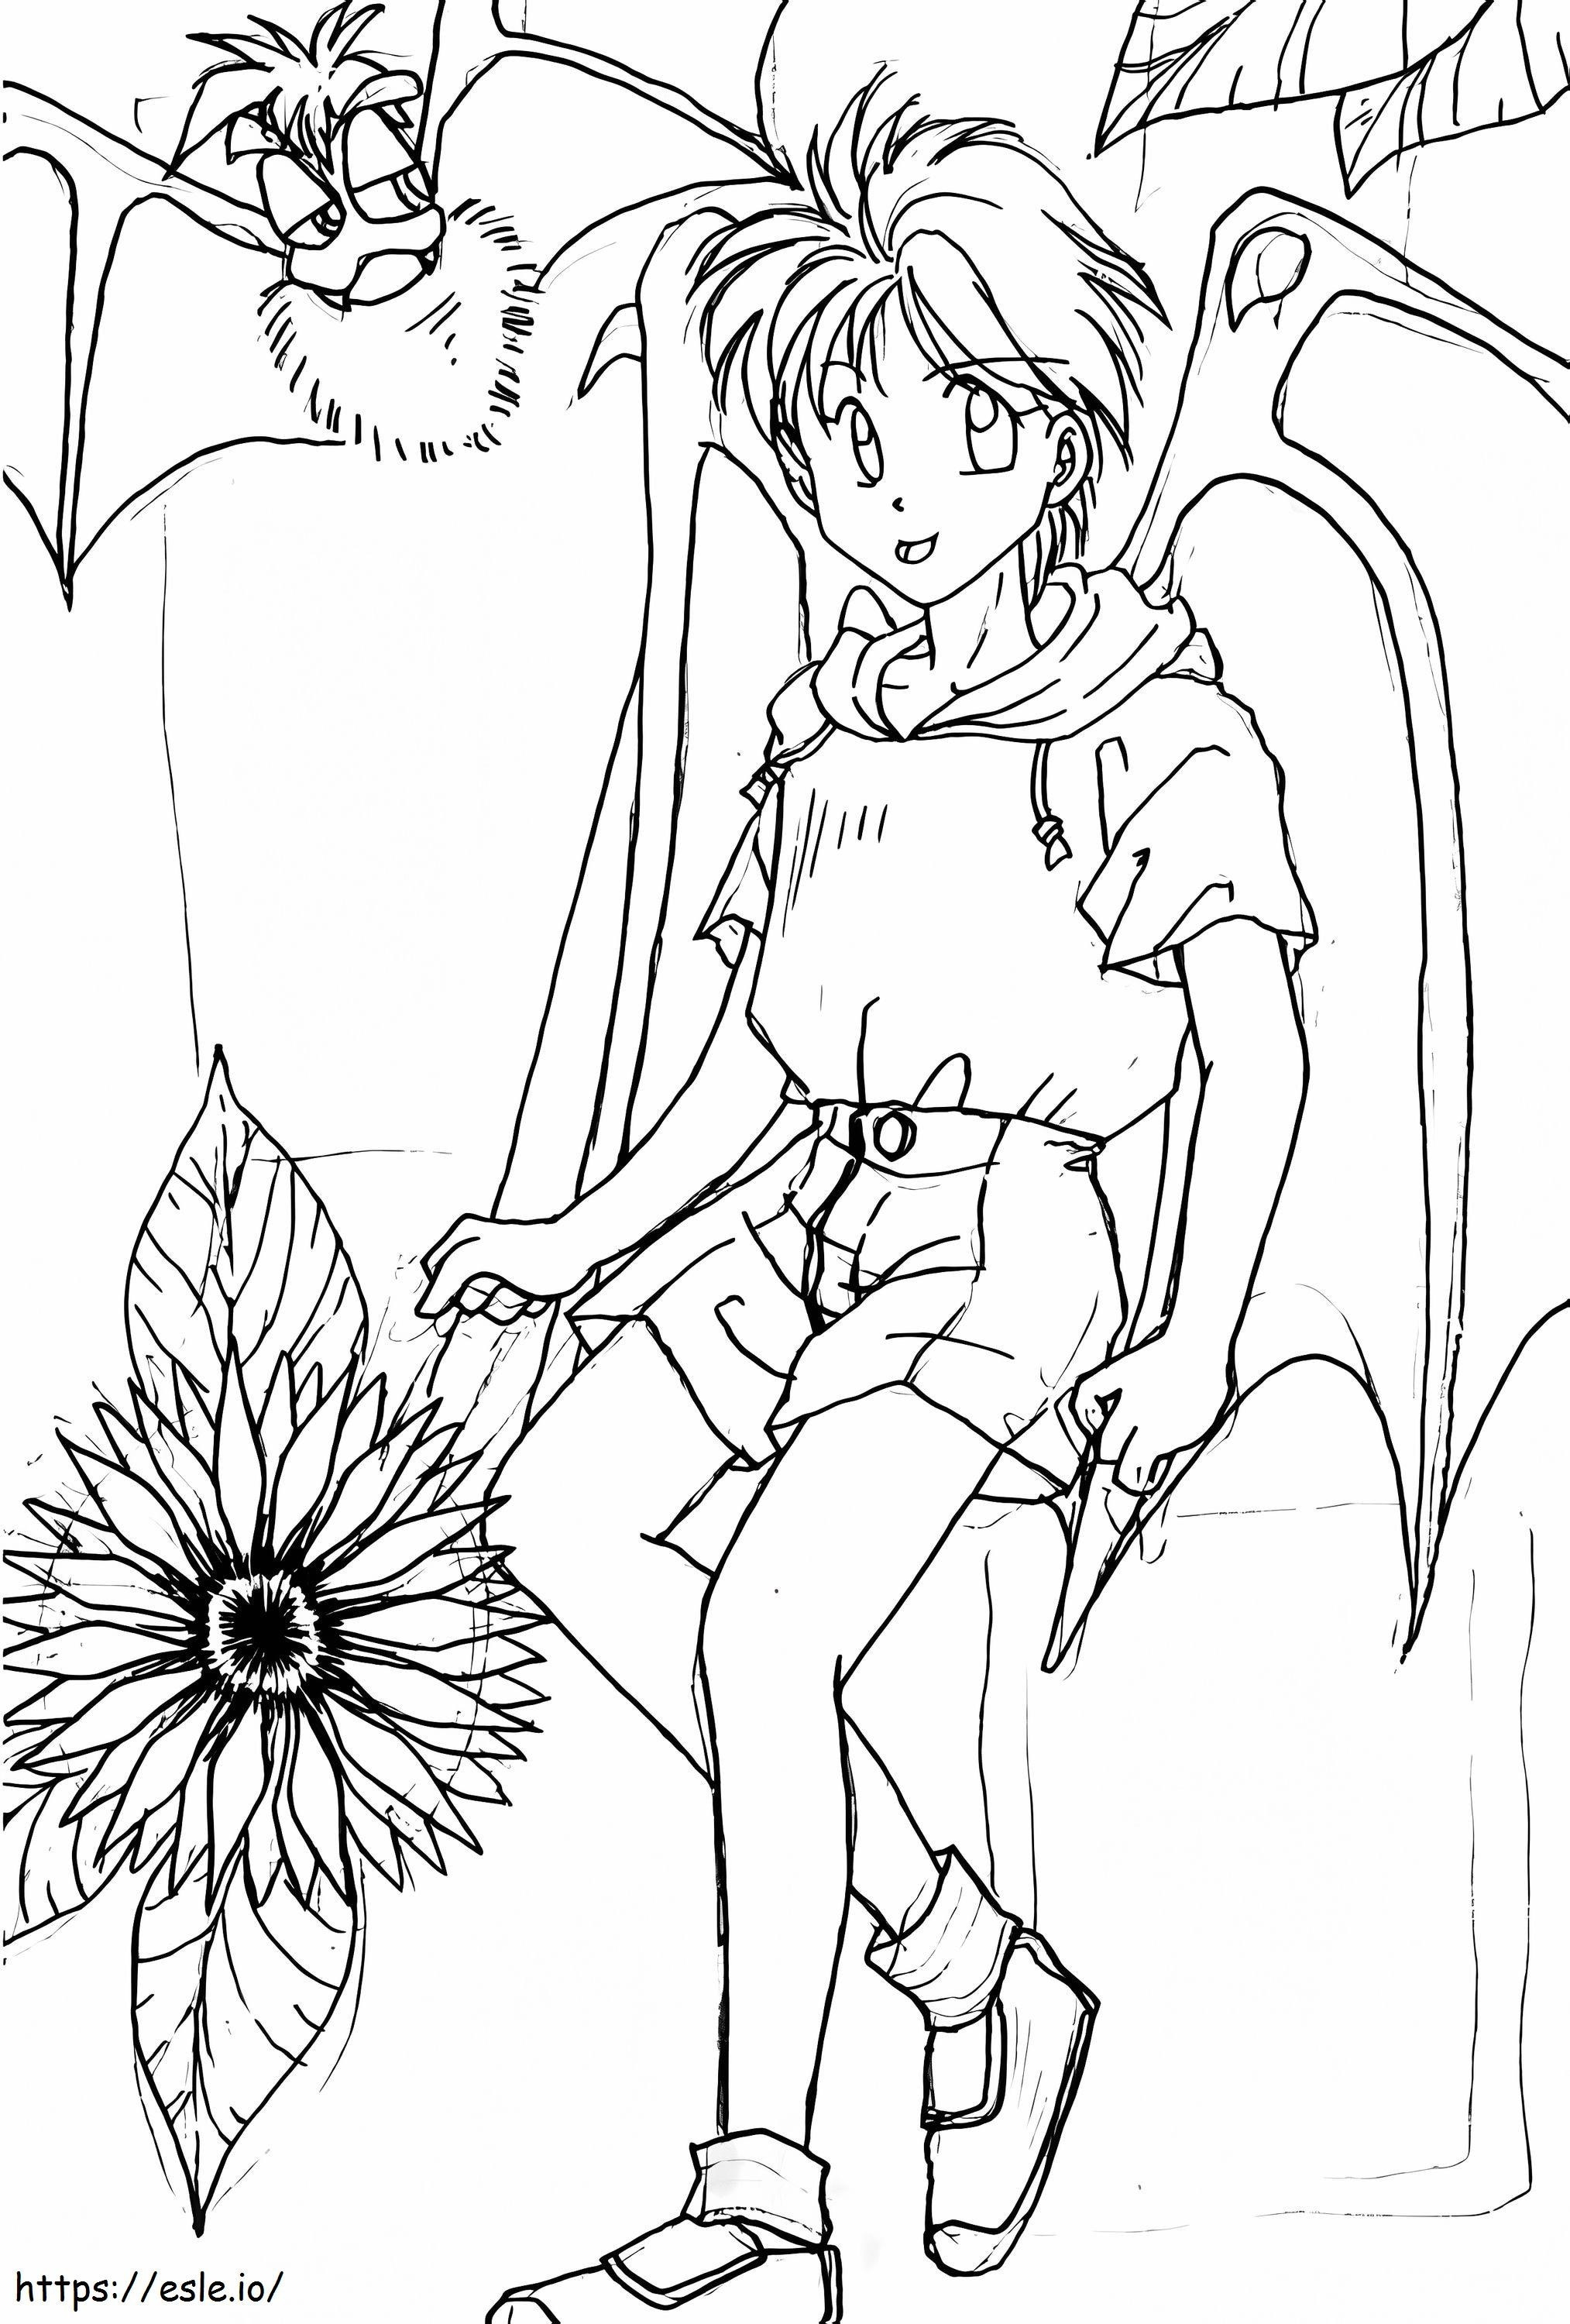 Little Anime Boy coloring page